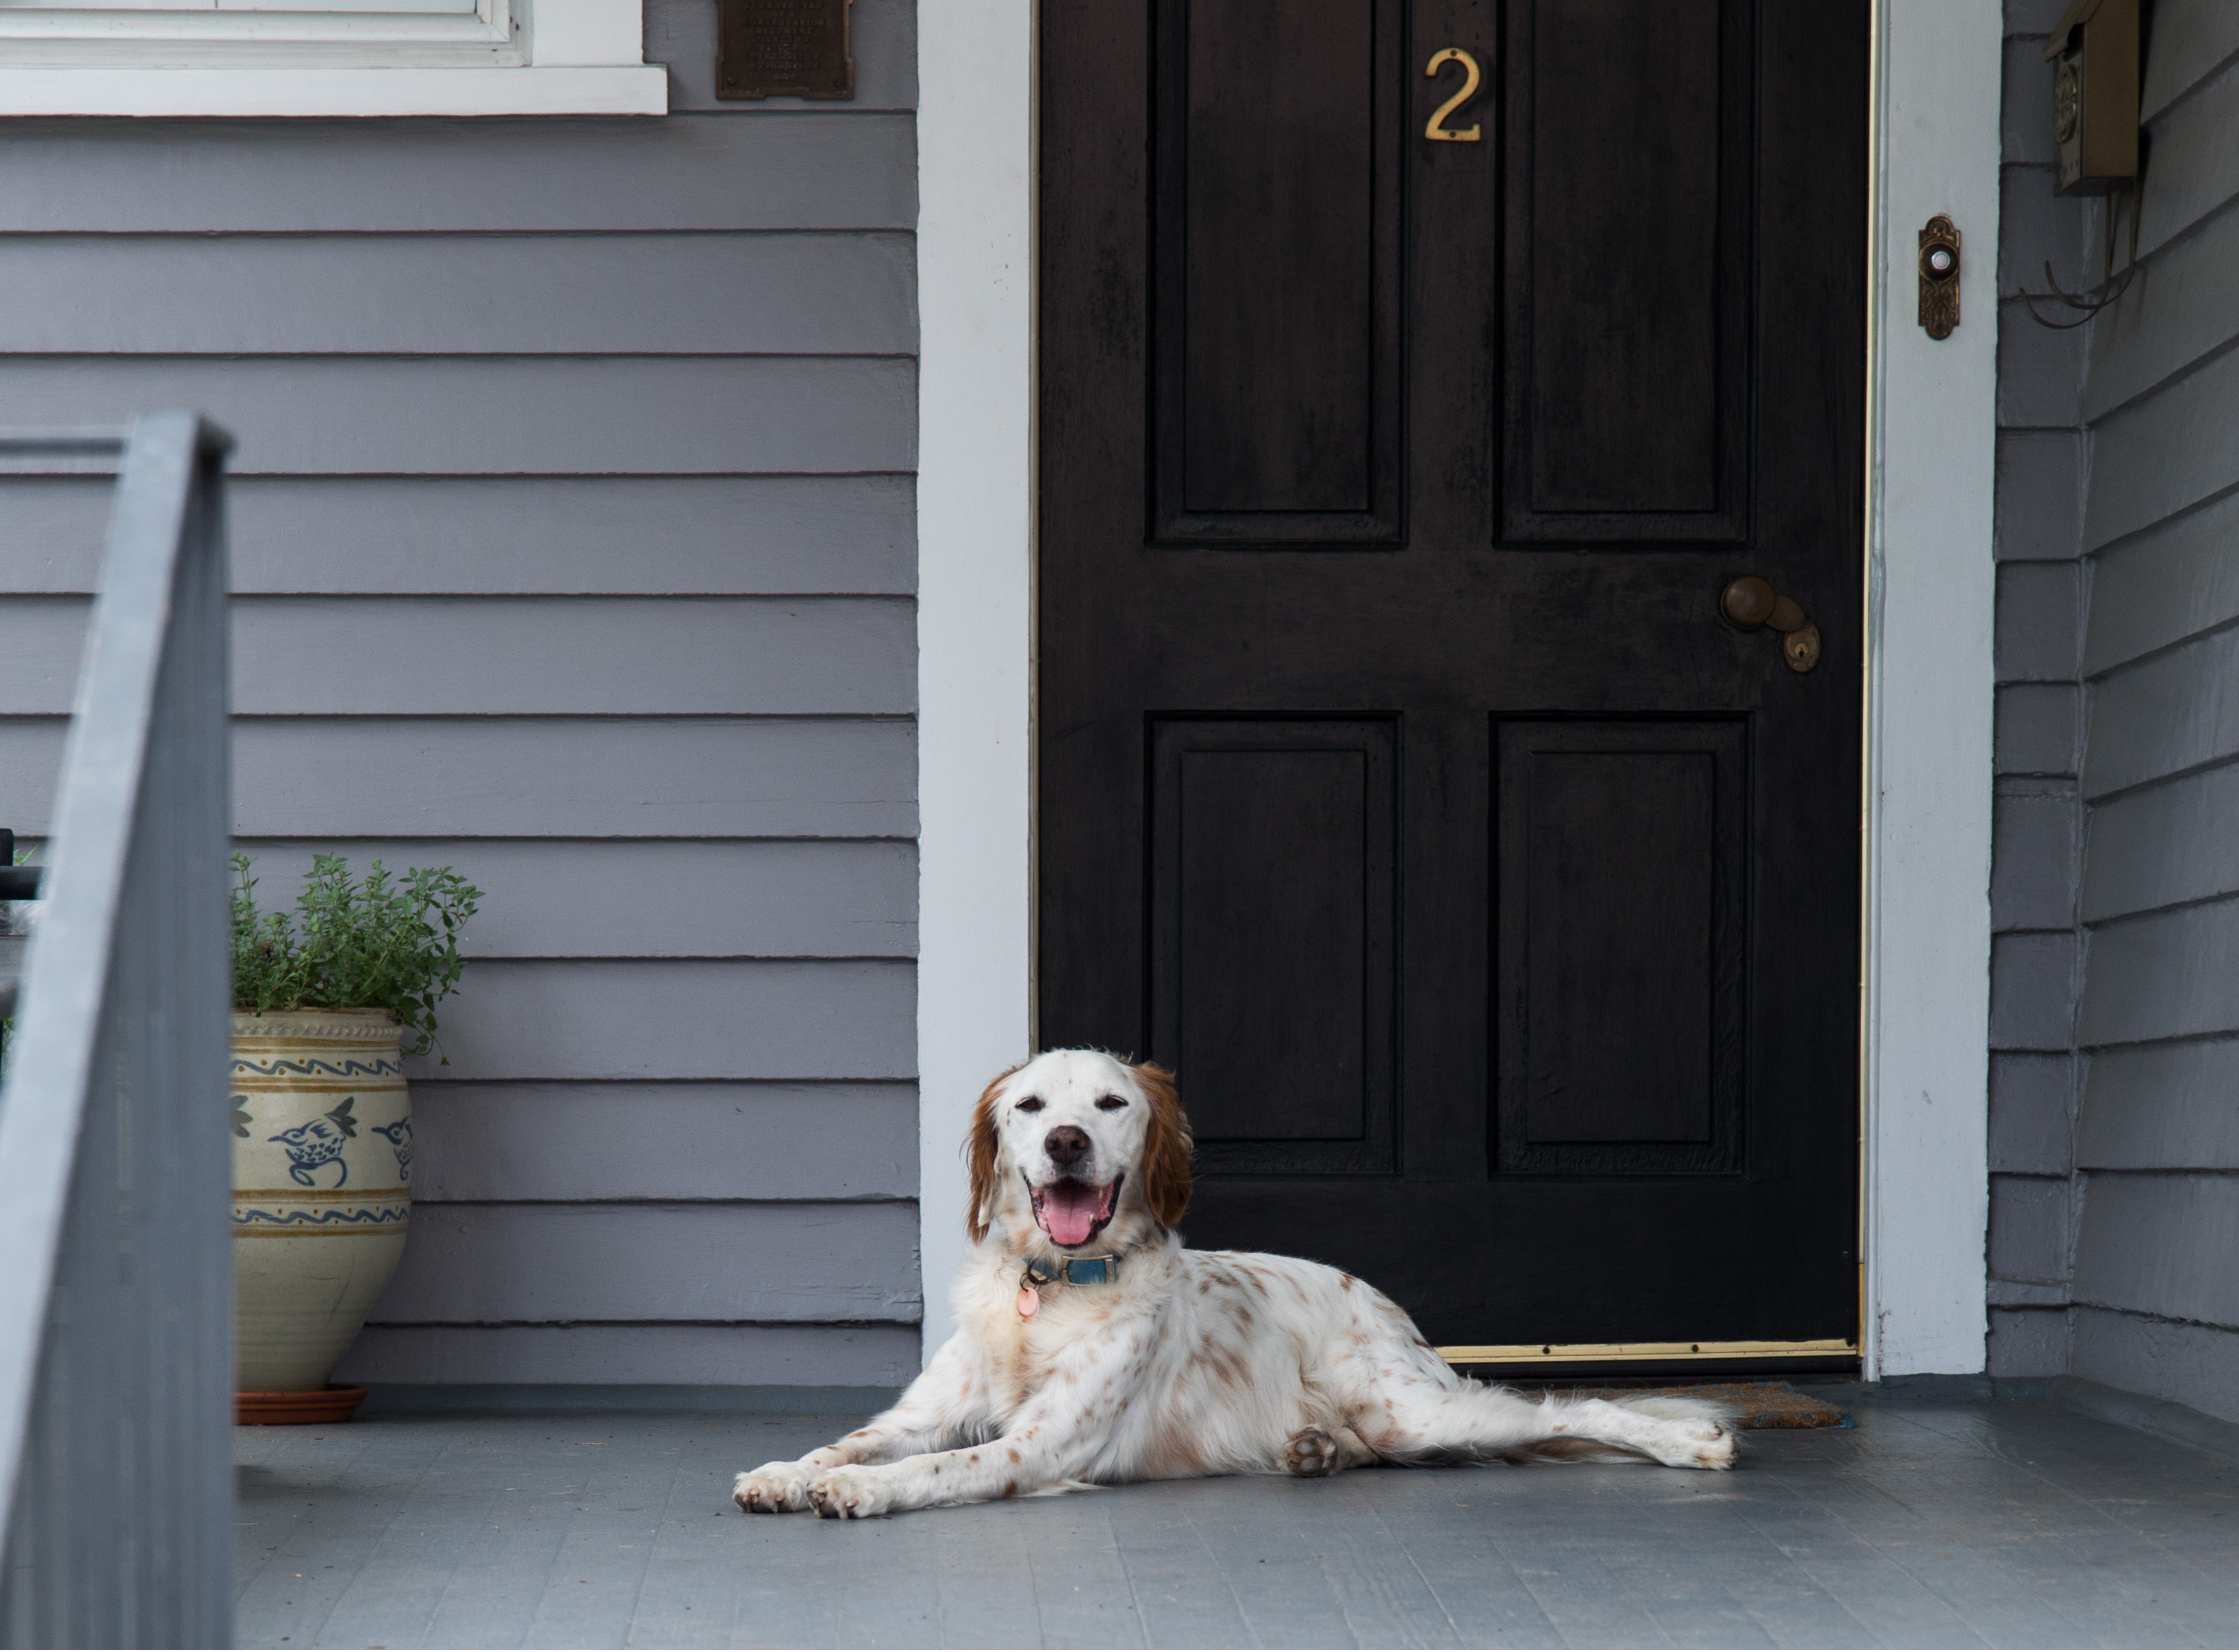 A white dog sits on a gray front porch by a black door and light brown planter.